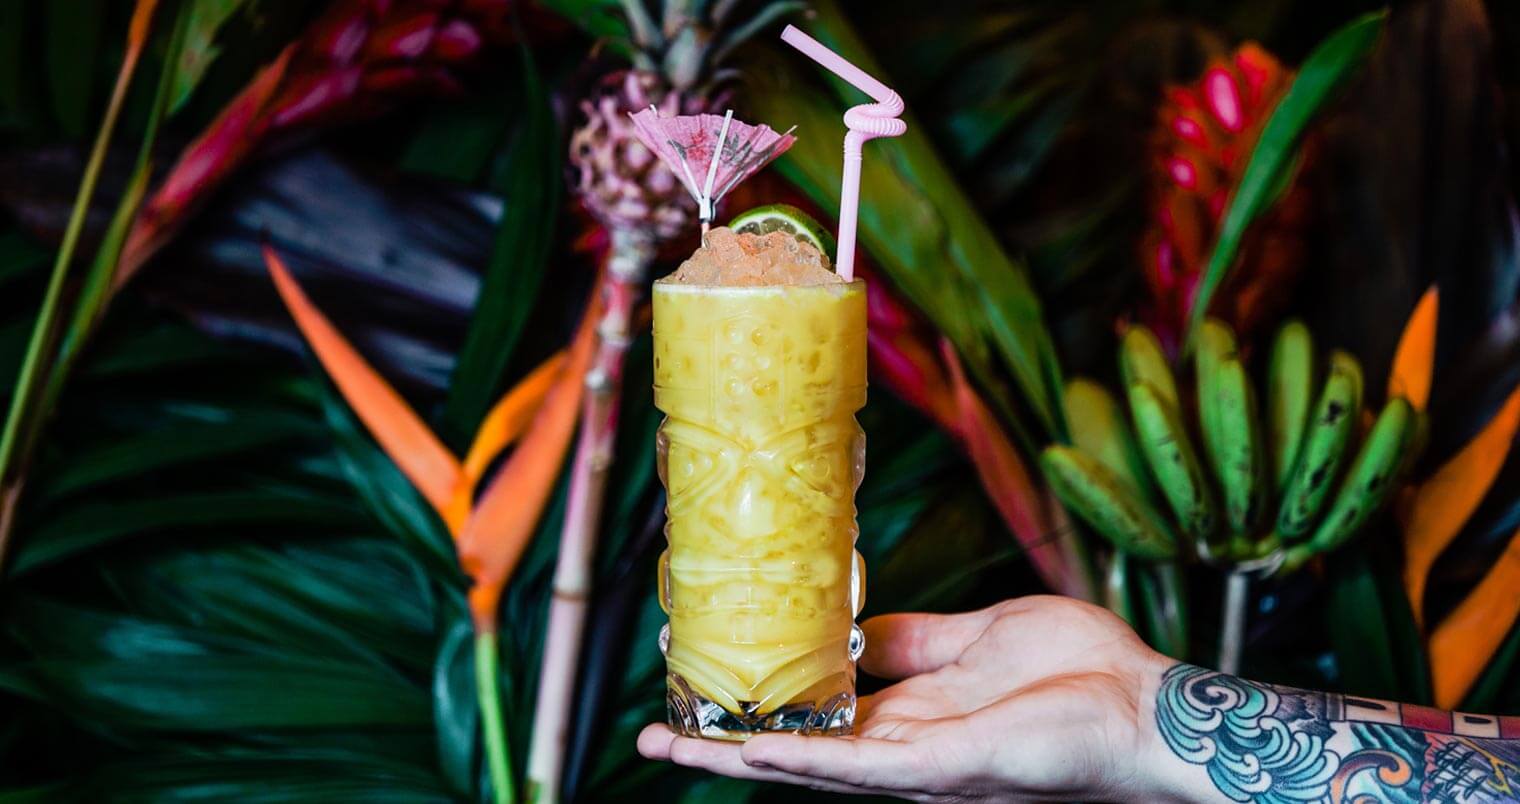 Yellowbelly cocktail in bartender's hand, tropical background, featured image